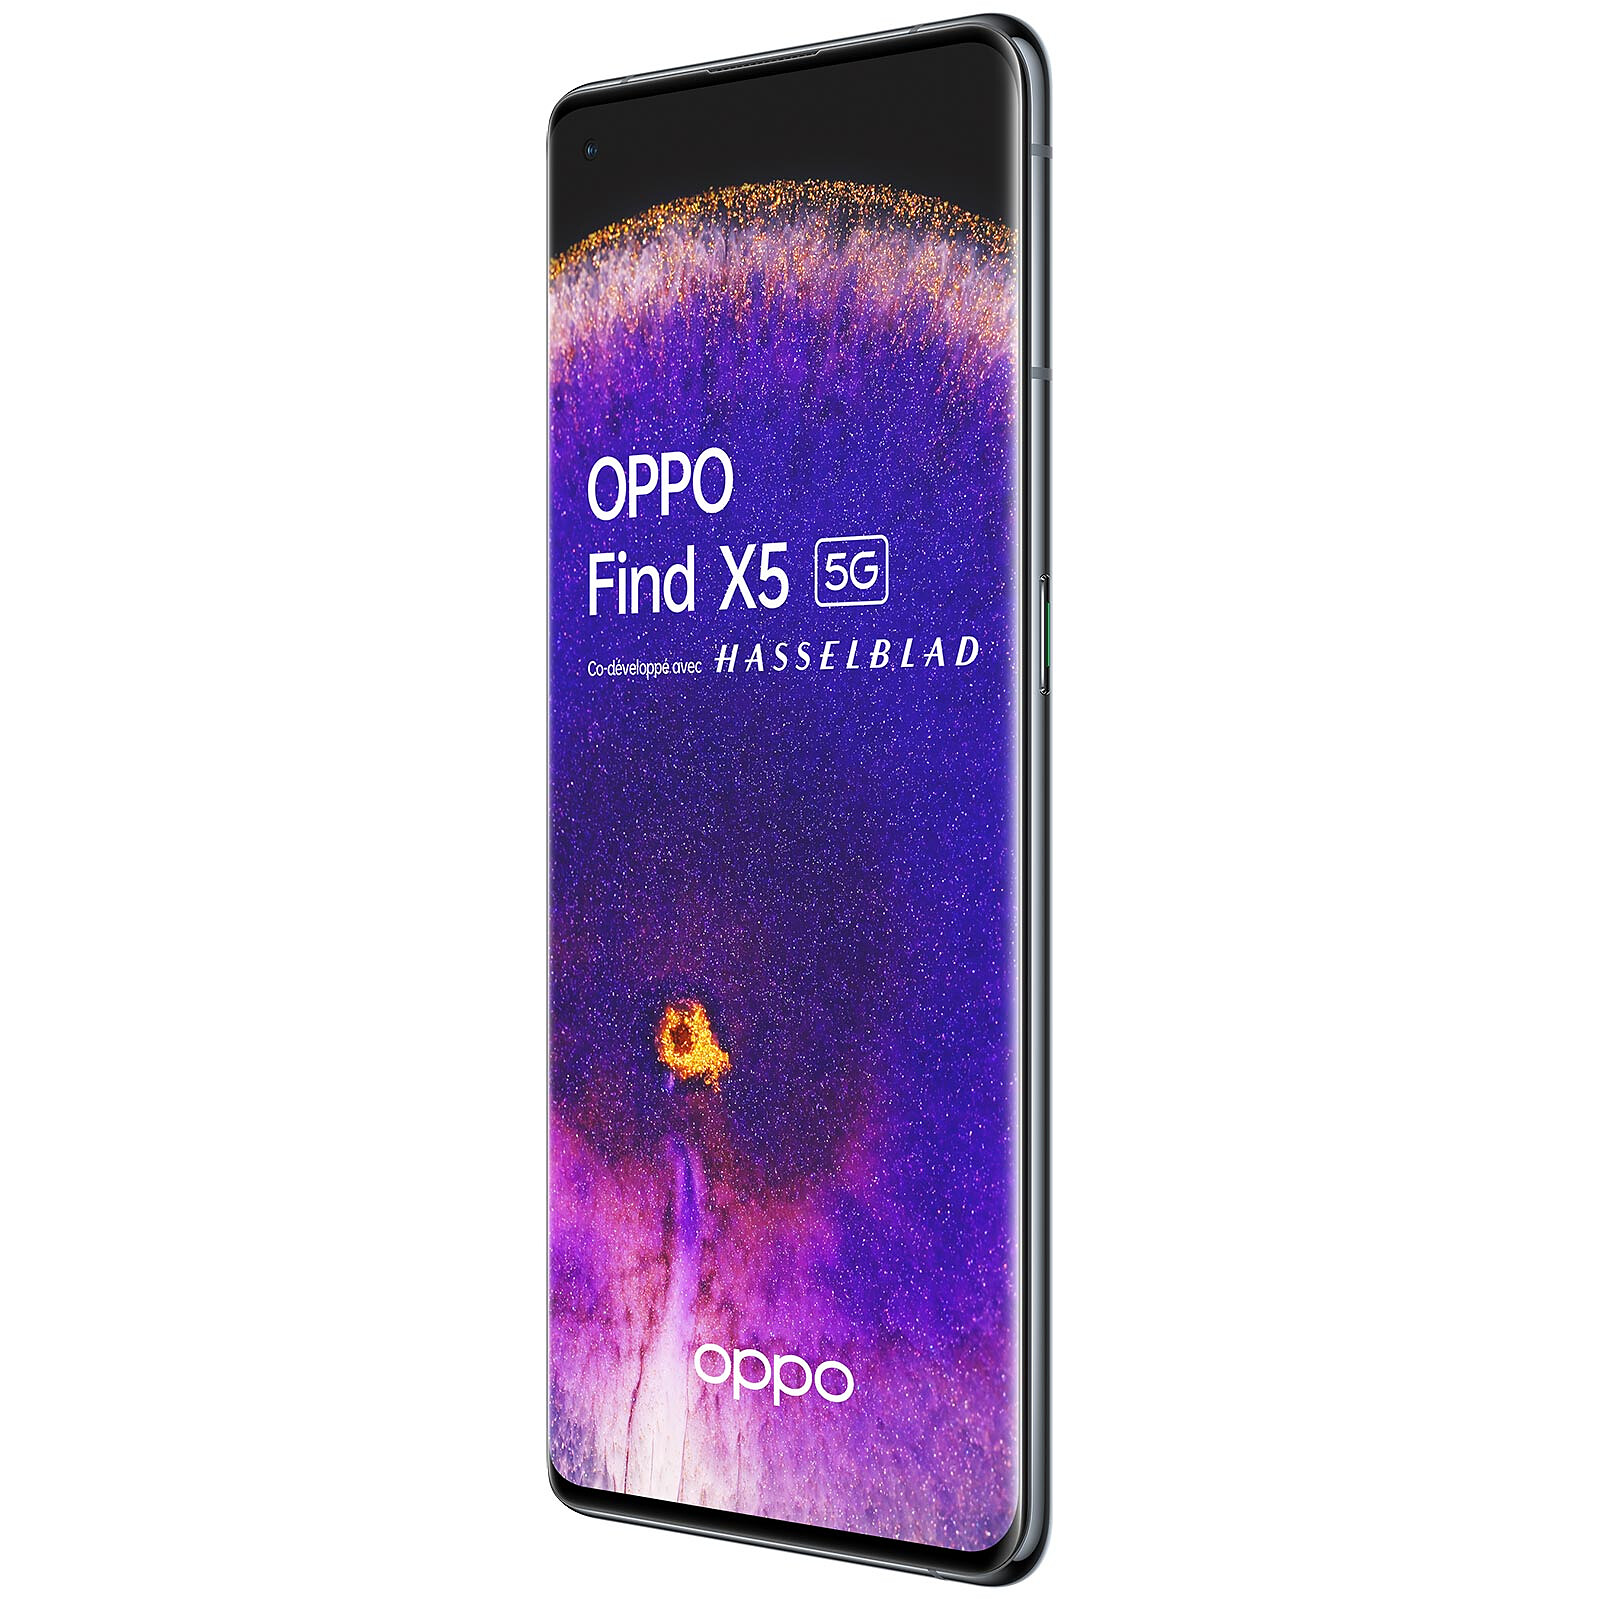 OPPO Find X5 5G Black - Mobile phone & smartphone - LDLC 3-year warranty